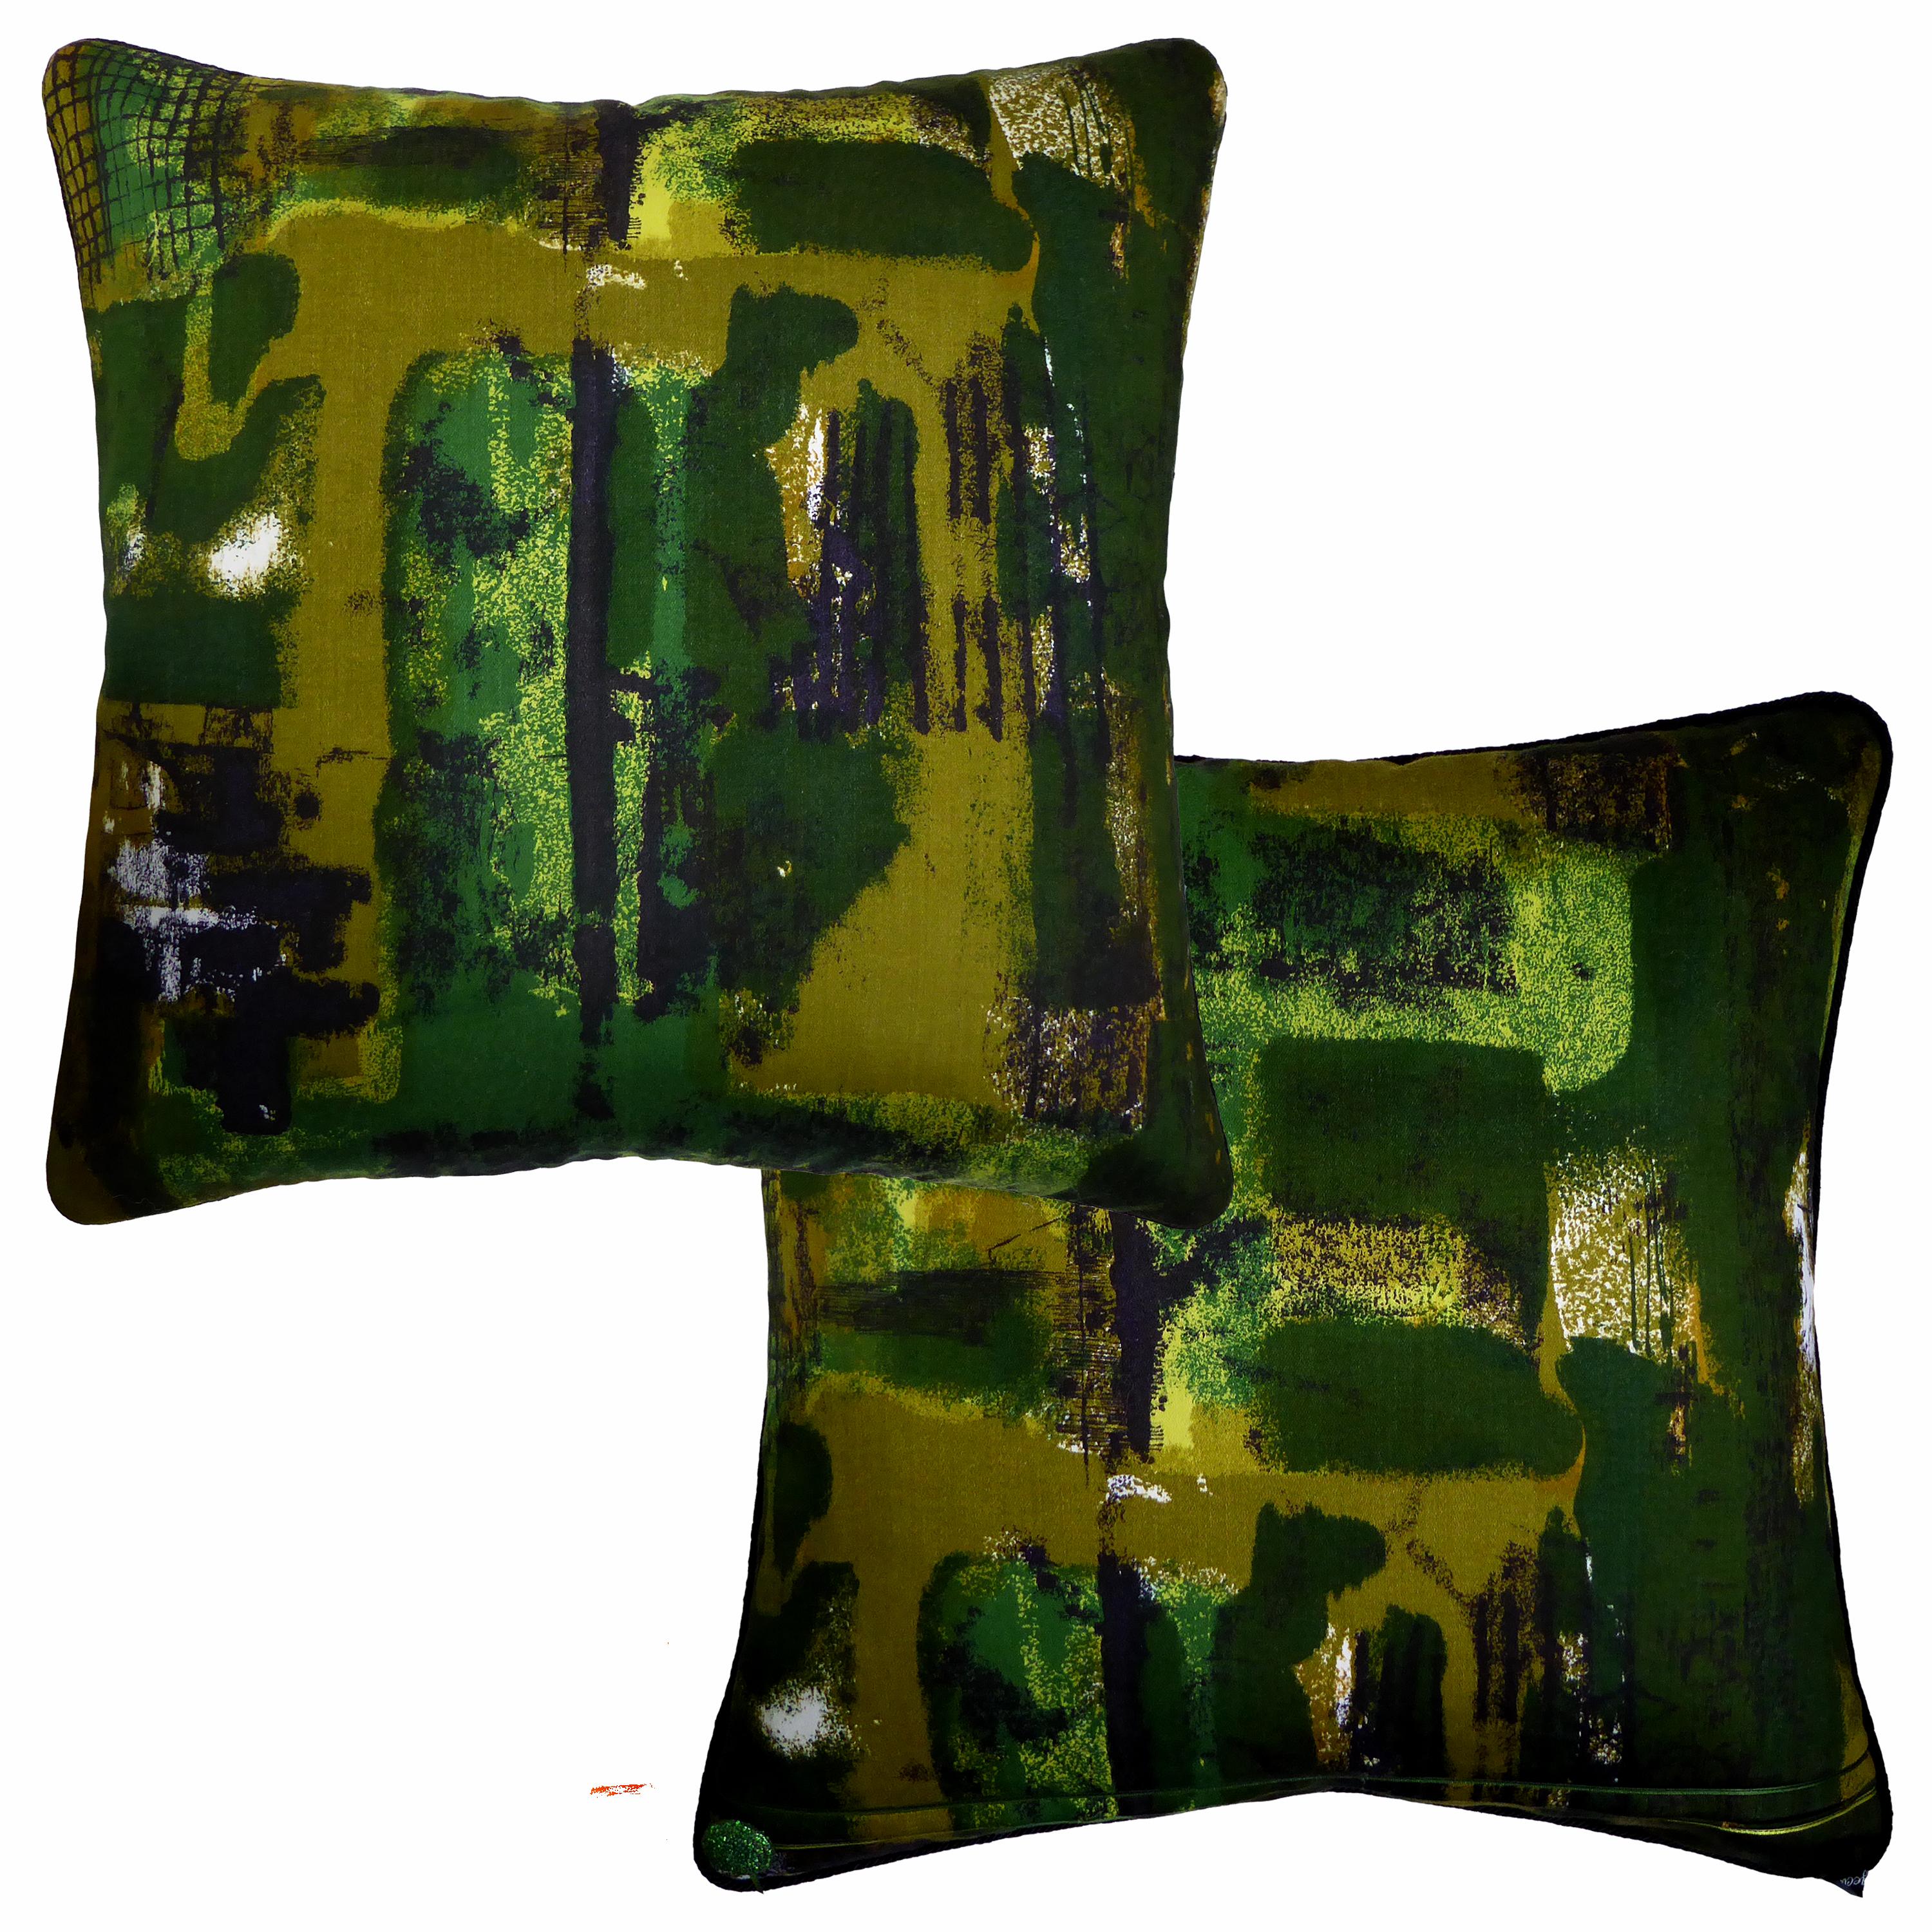 Hand-Crafted 'Vintage Cushions' Luxury Bespoke Midcentury Pillow 'Rhapsody' Made in London